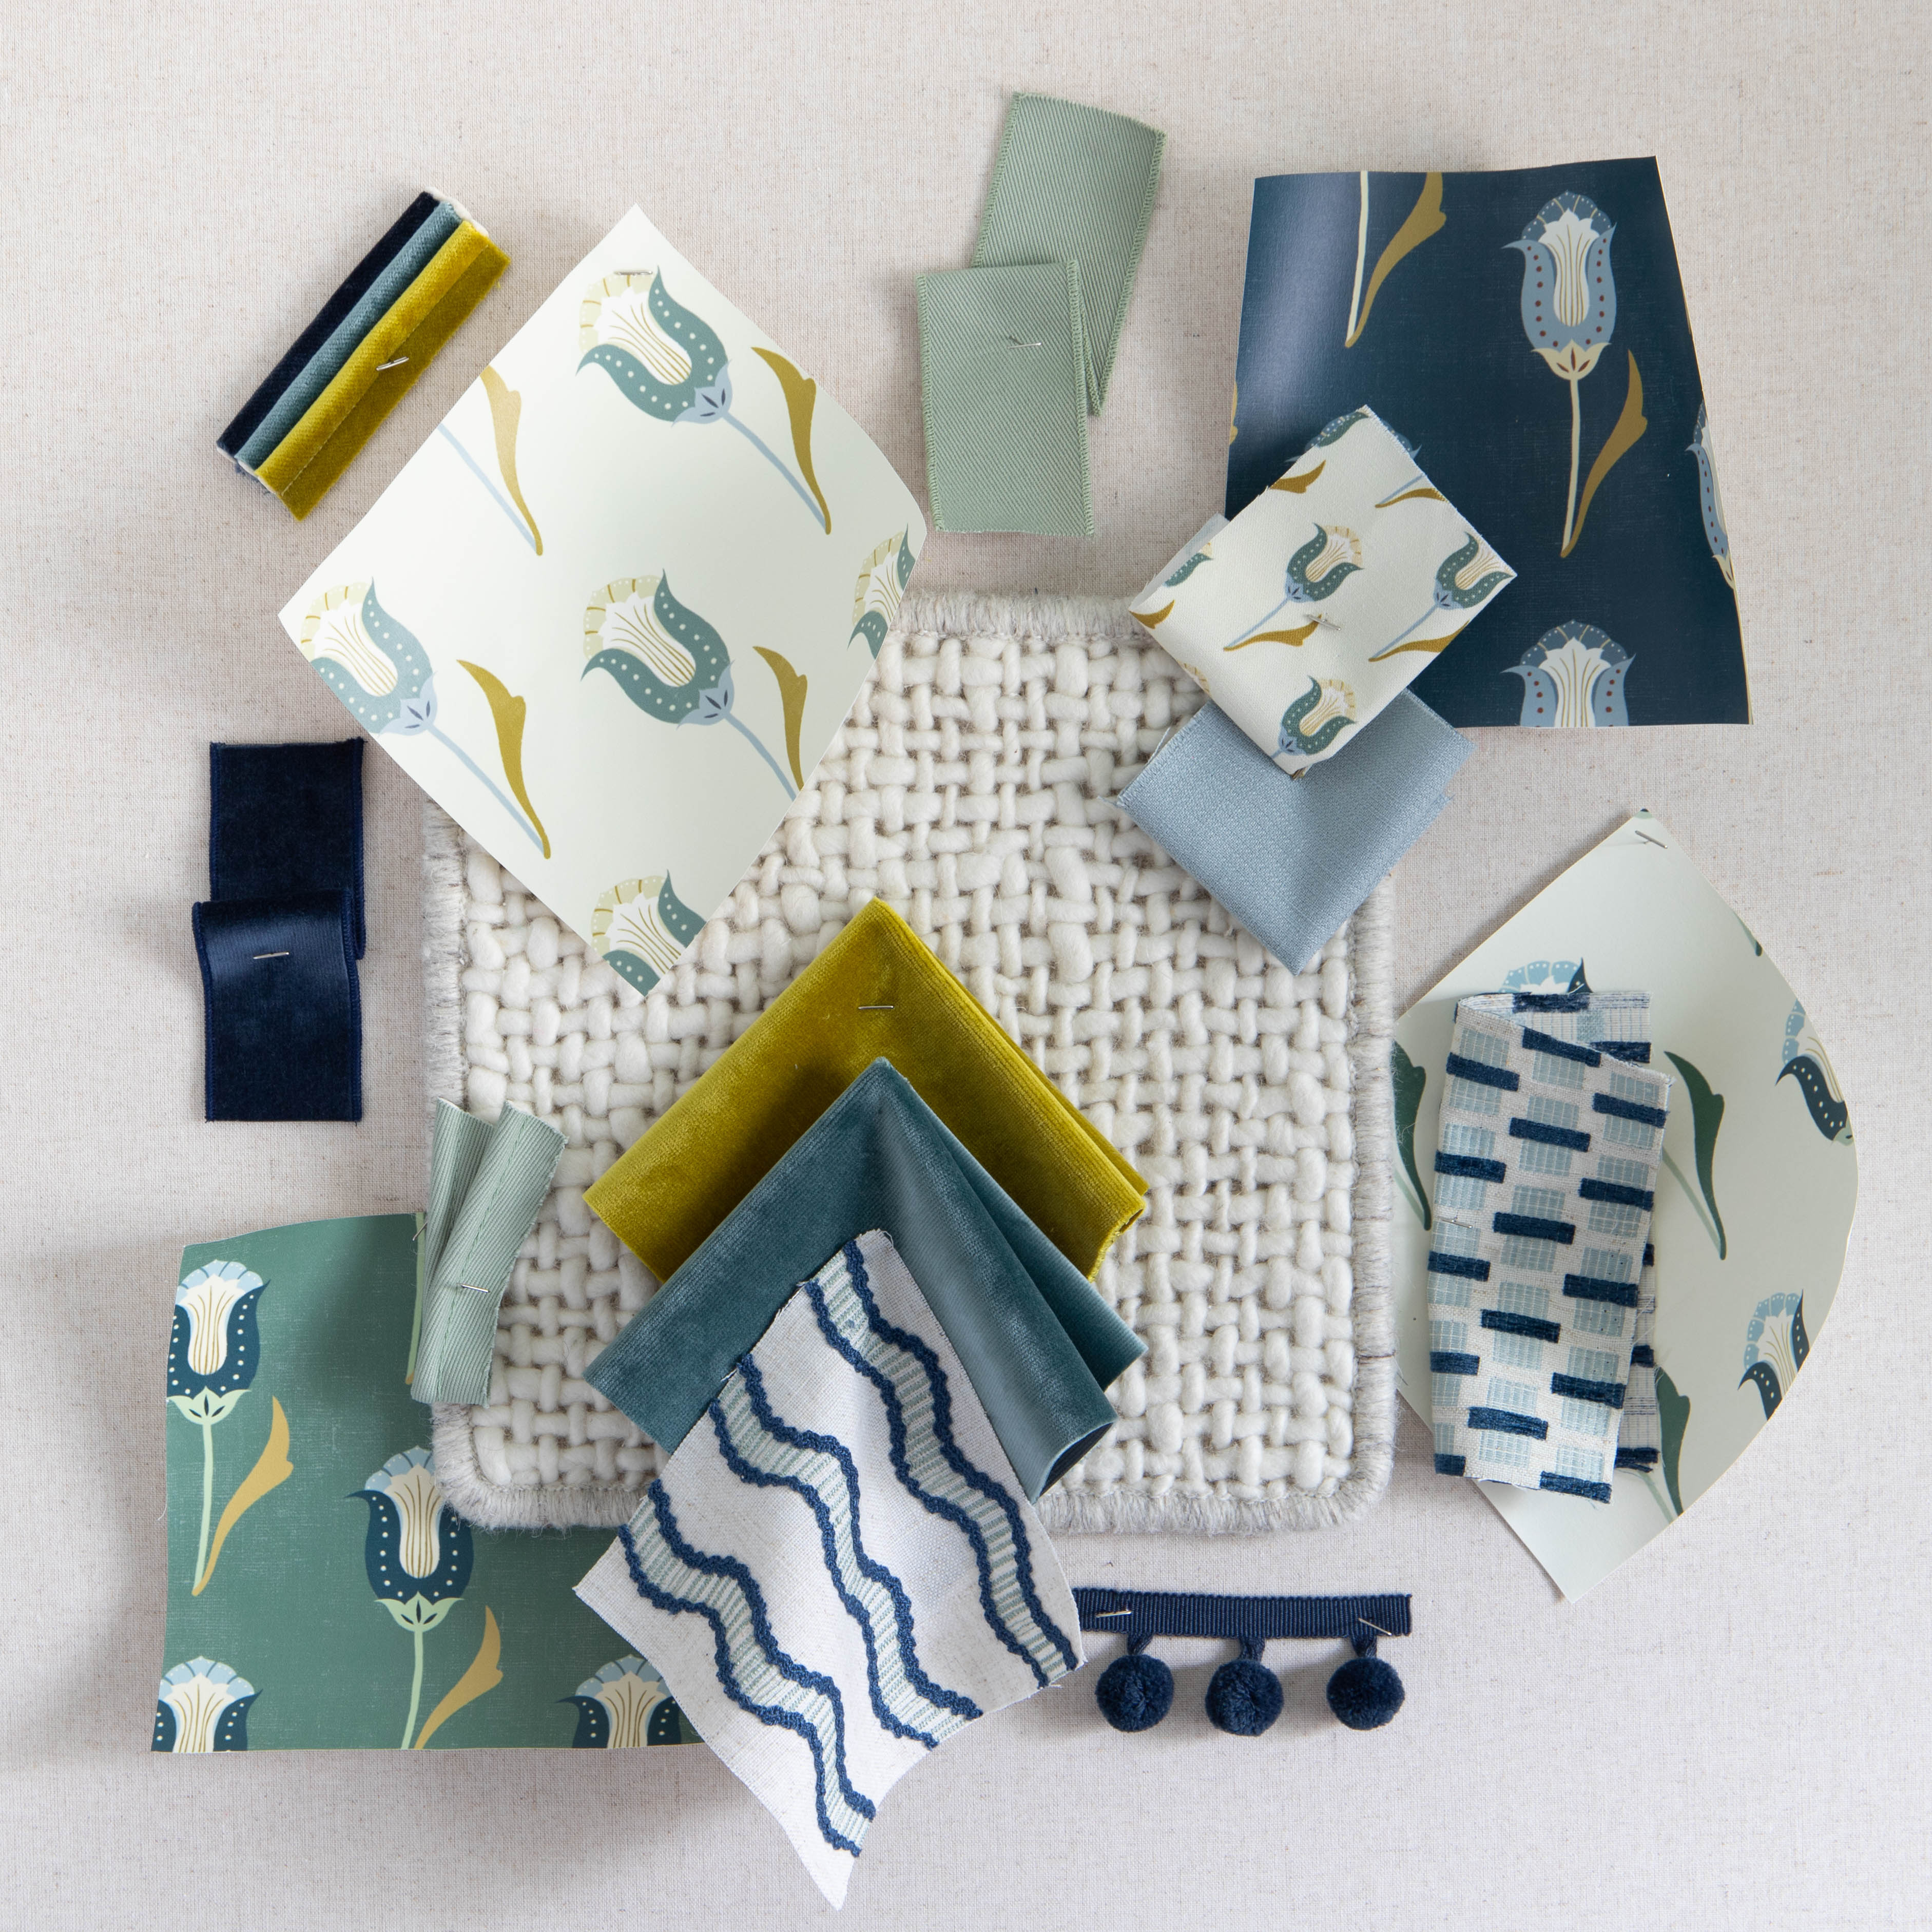 interior design mood board with blue, green, and floral fabric swatches and trim options.